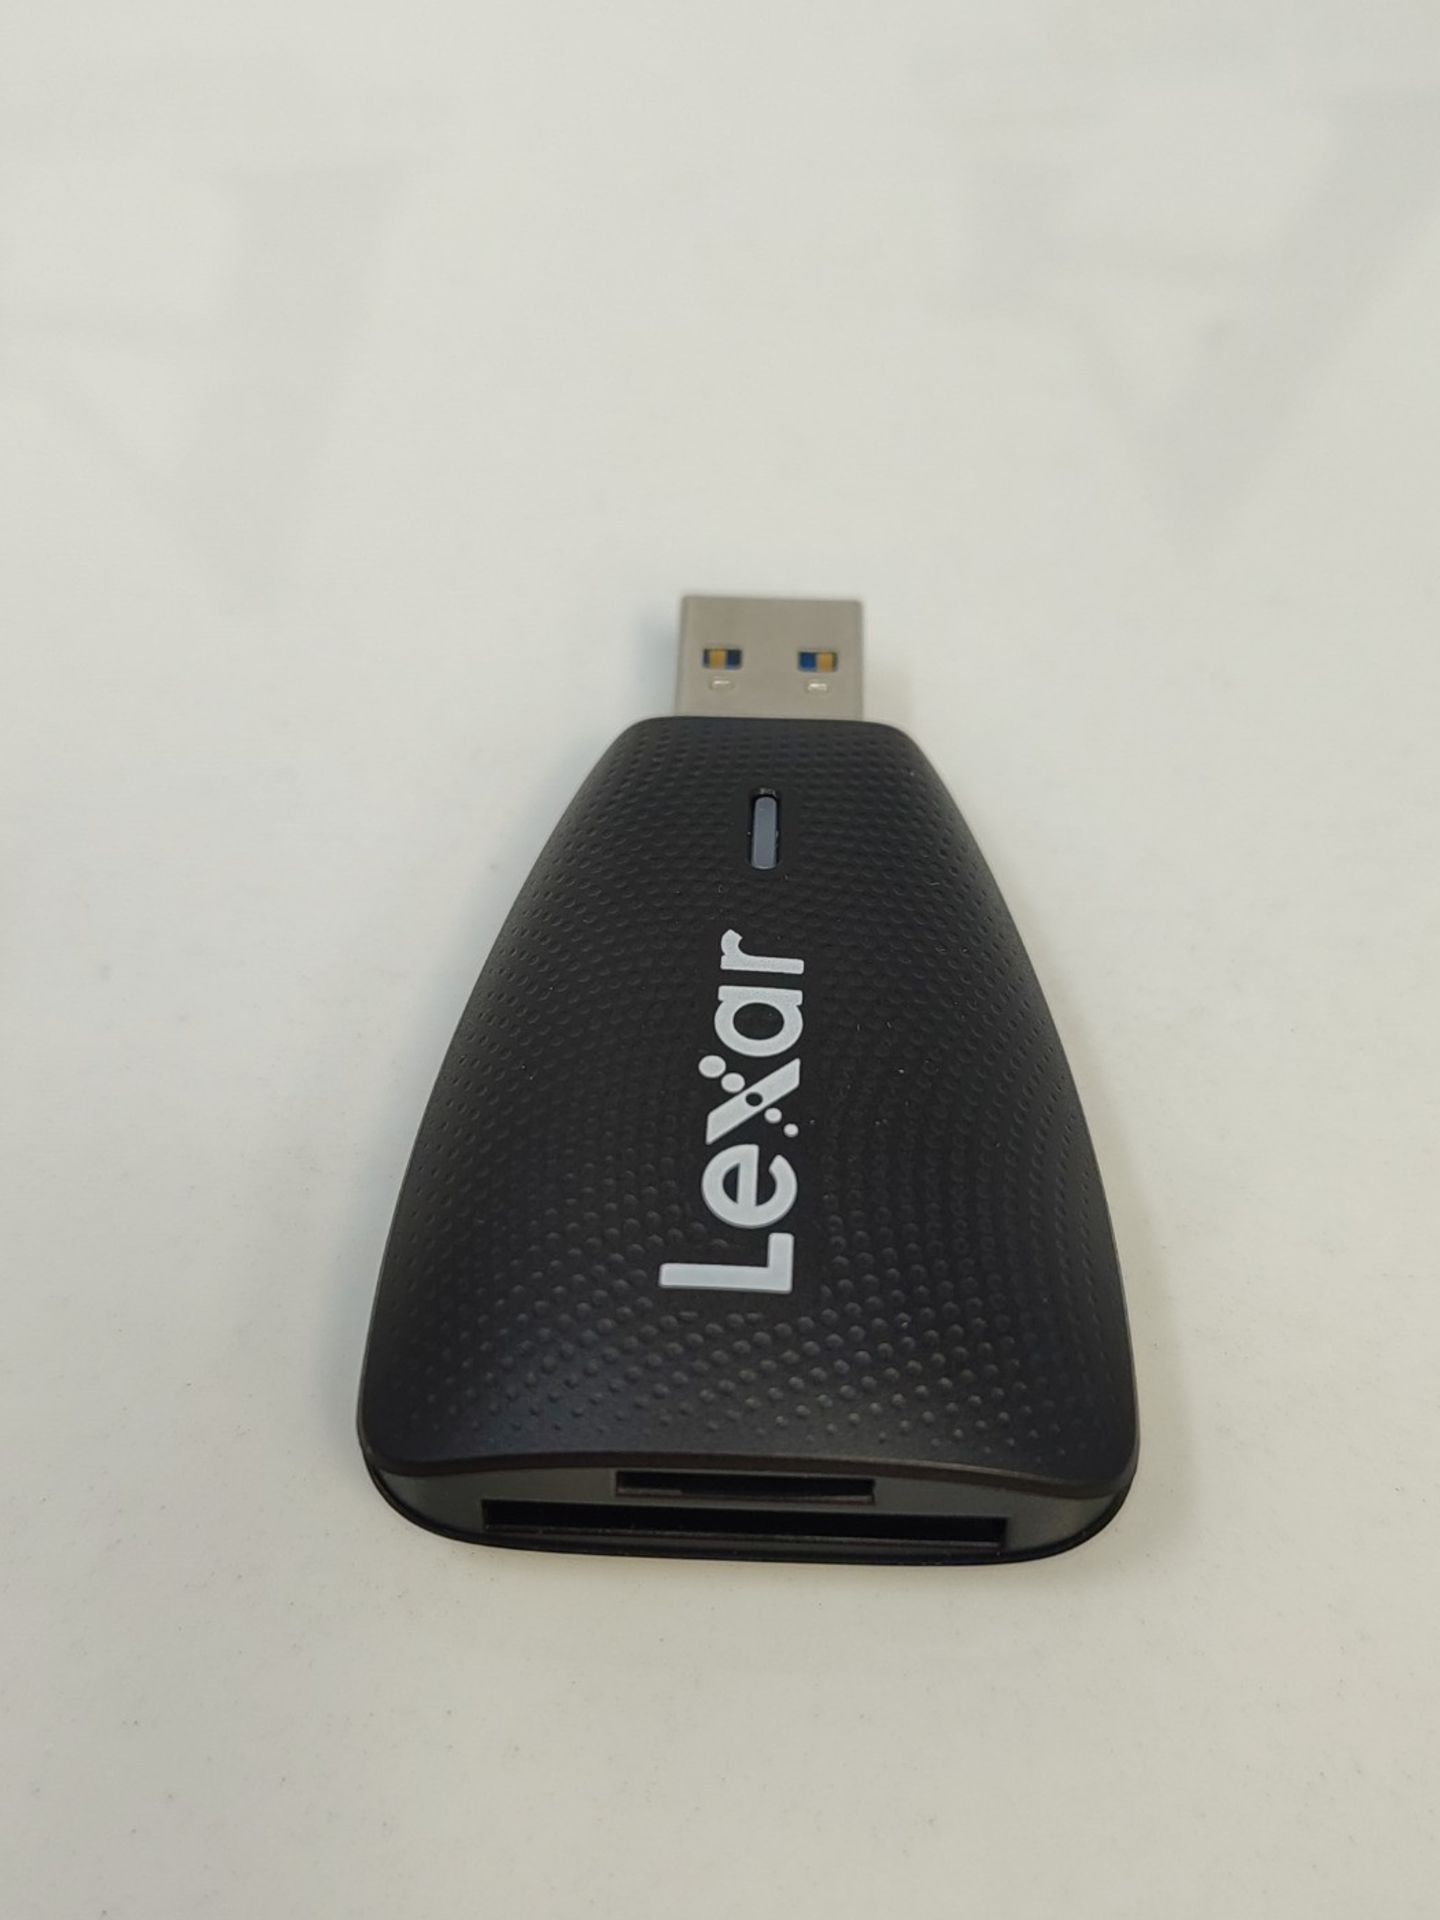 Lexar Multi-Card 2-in-1 USB 3.1 External Card Reader, Up to 312 MB/s for UHS-I UHS-II - Image 3 of 3